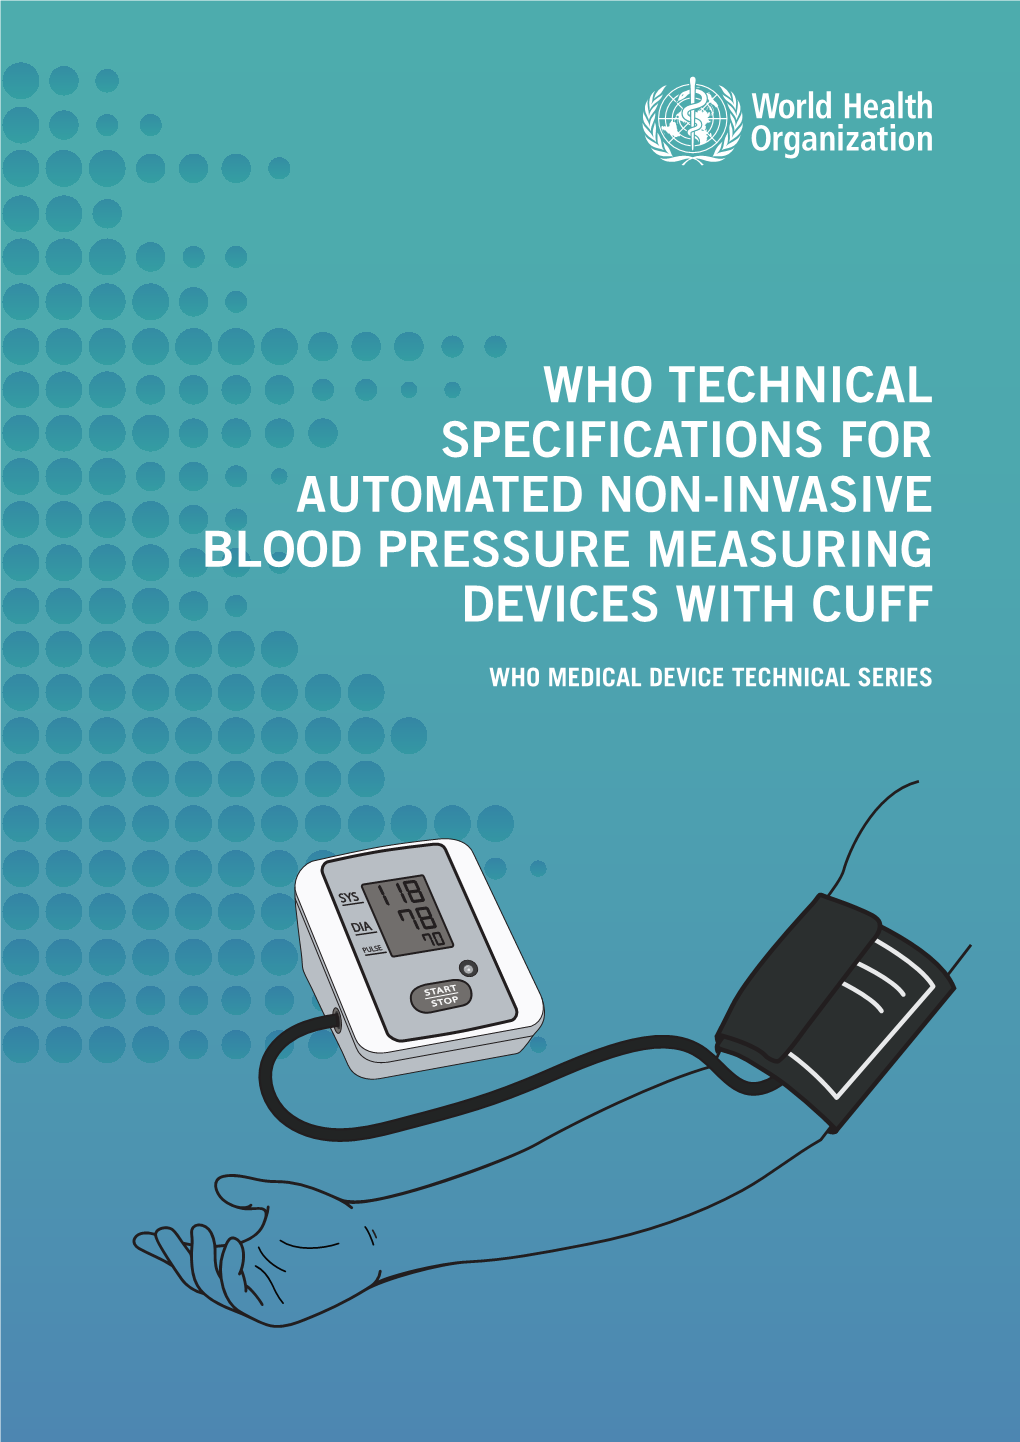 Who Technical Specifications for Automated Non-Invasive Blood Pressure Measuring Devices with Cuff